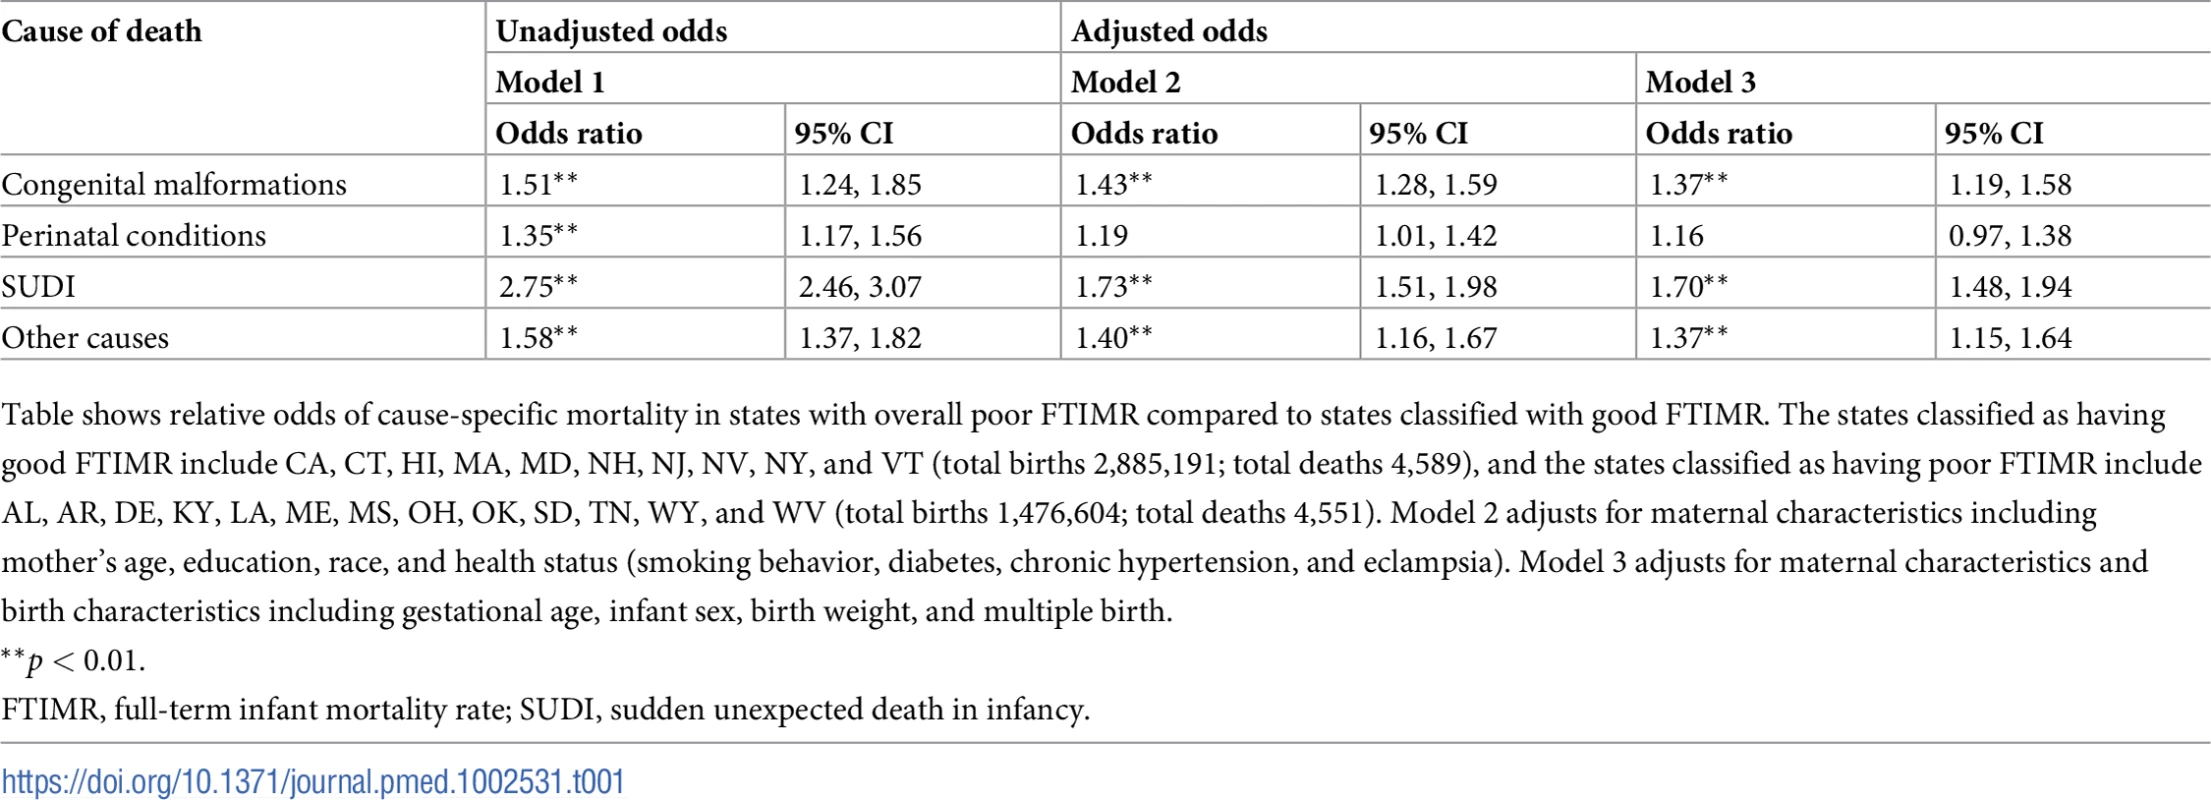 Relative odds of cause-specific full-term infant mortality in states with poor FTIMR relative to states with good FTIMR.